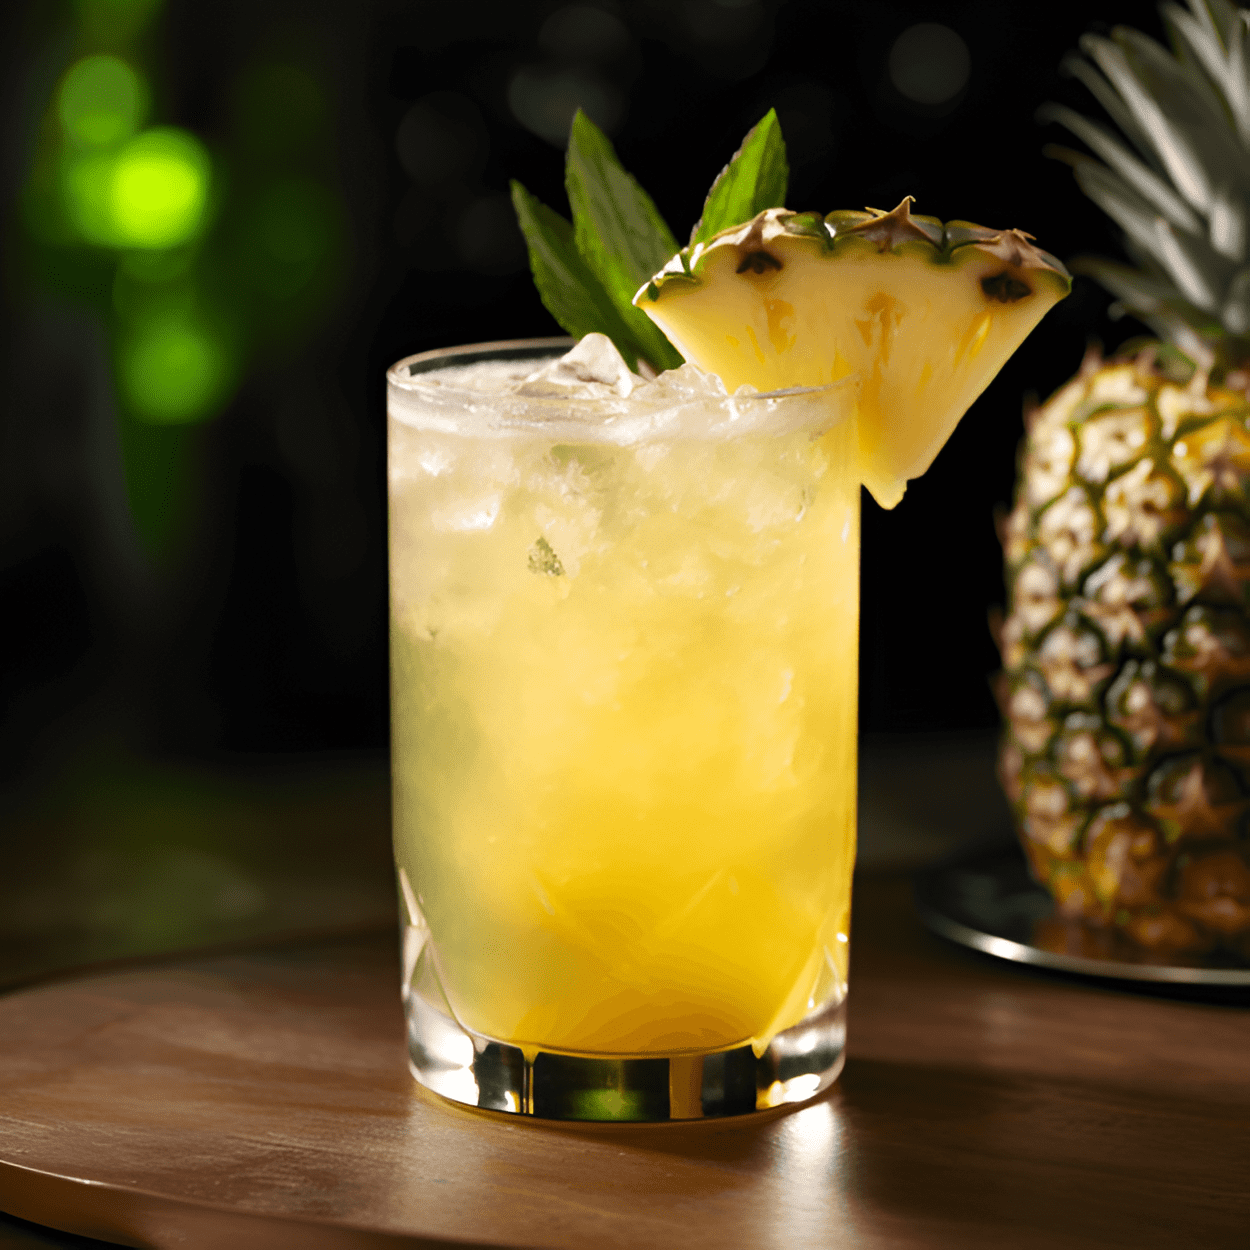 Caraballo Cocktail Recipe - The Caraballo Cocktail is a delightful mix of sweet, sour, and spicy. The sweetness of the pineapple juice is balanced by the tartness of the lime, while the jalapeno gives it a surprising kick. The rum adds a smooth, rich undertone that ties all the flavors together.